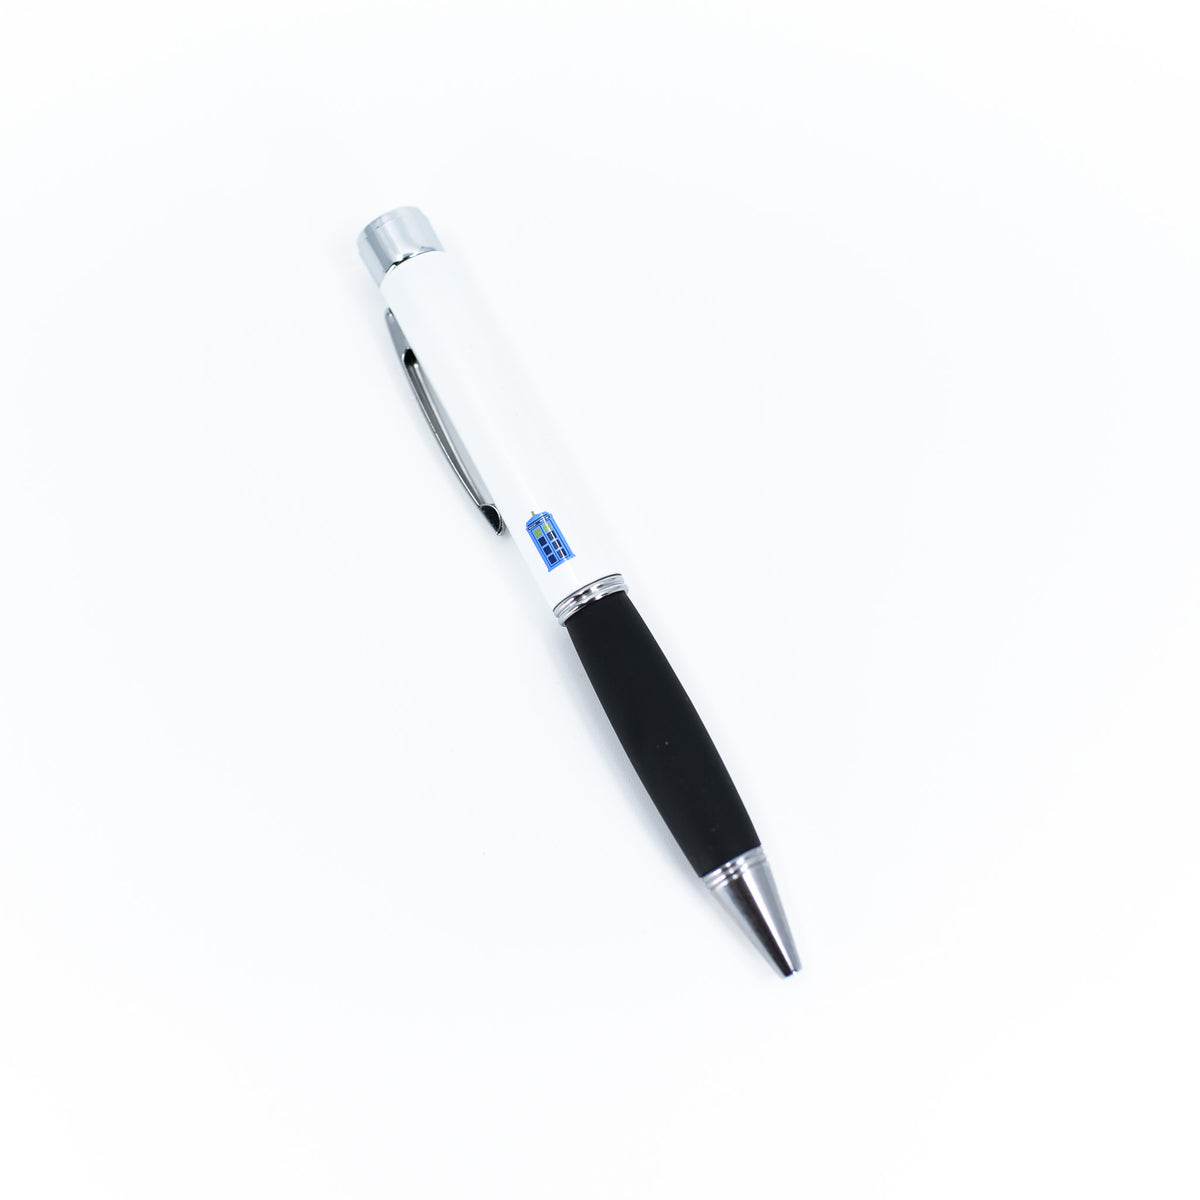 White Doctor Who light pen with blue TARDIS symbol and black pen grip